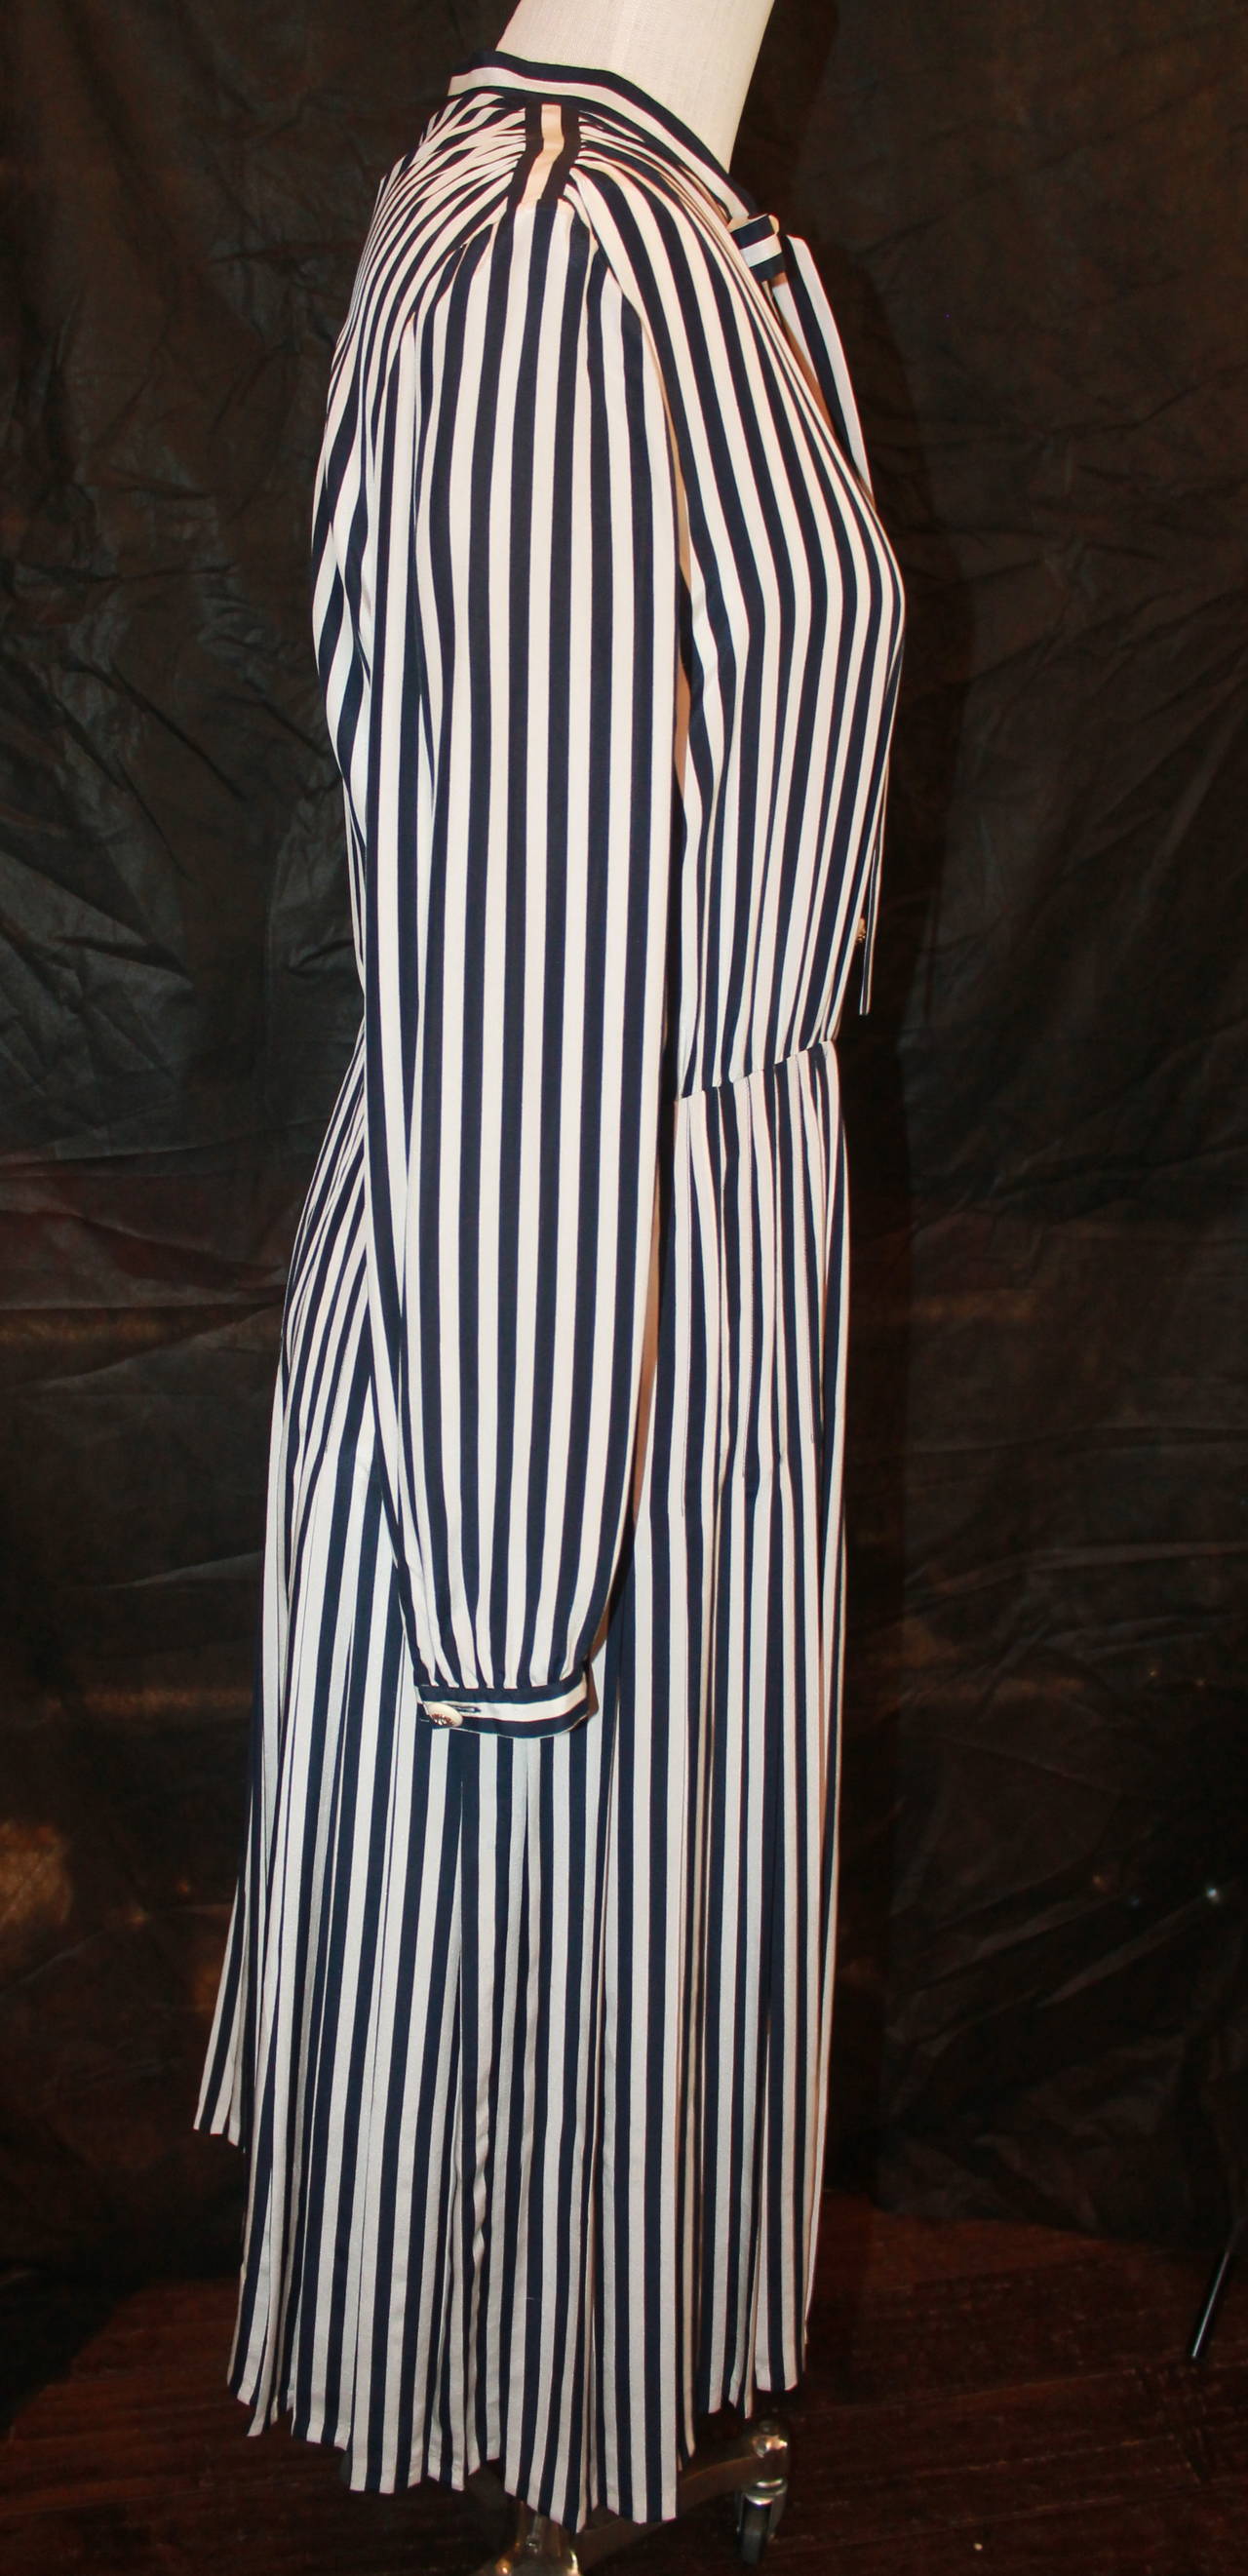 Chanel 1970s Navy & White Silk Striped Pleated Dress - 42. This dress is in excellent vintage condition with wear consistent with age.

Measurements:
Bust- up to 40